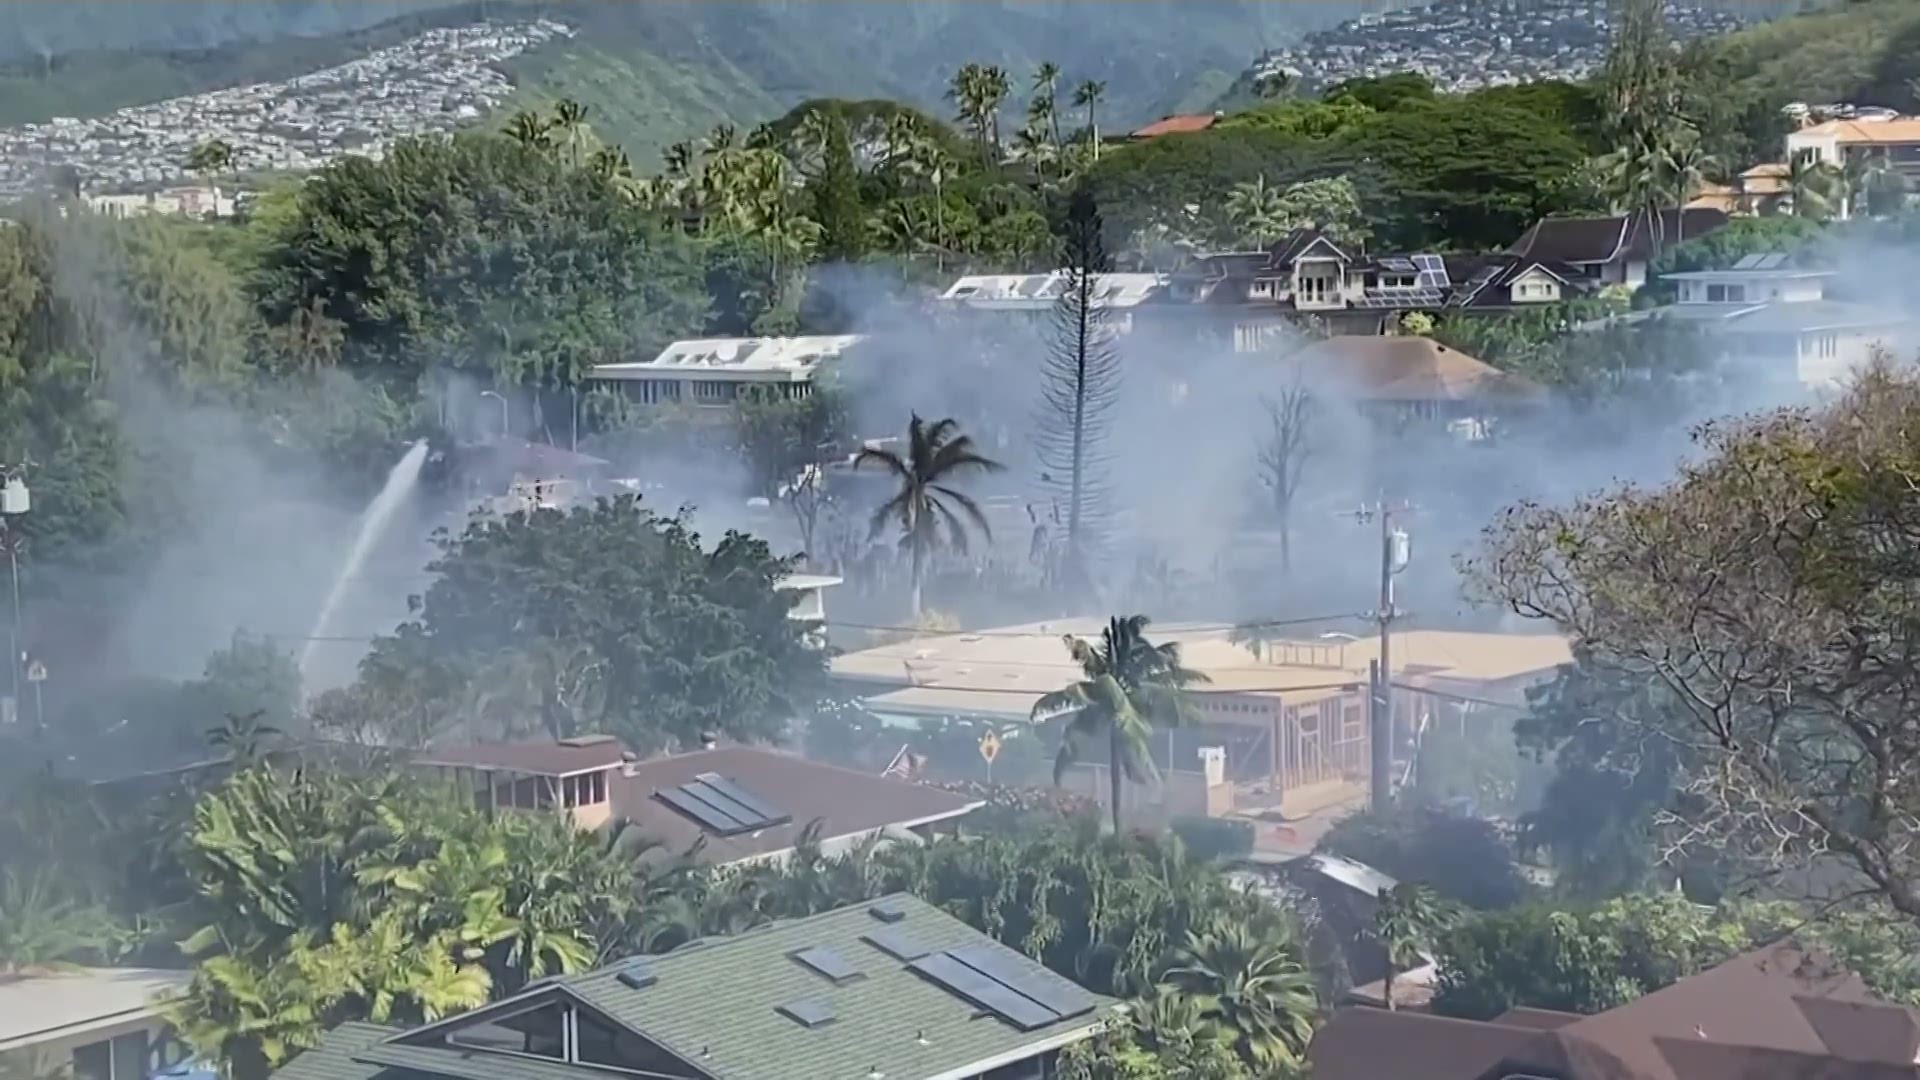 Witnesses describe the scene in Honolulu on Sunday as police respond to a shooting in which two officers died and a house fire spread.